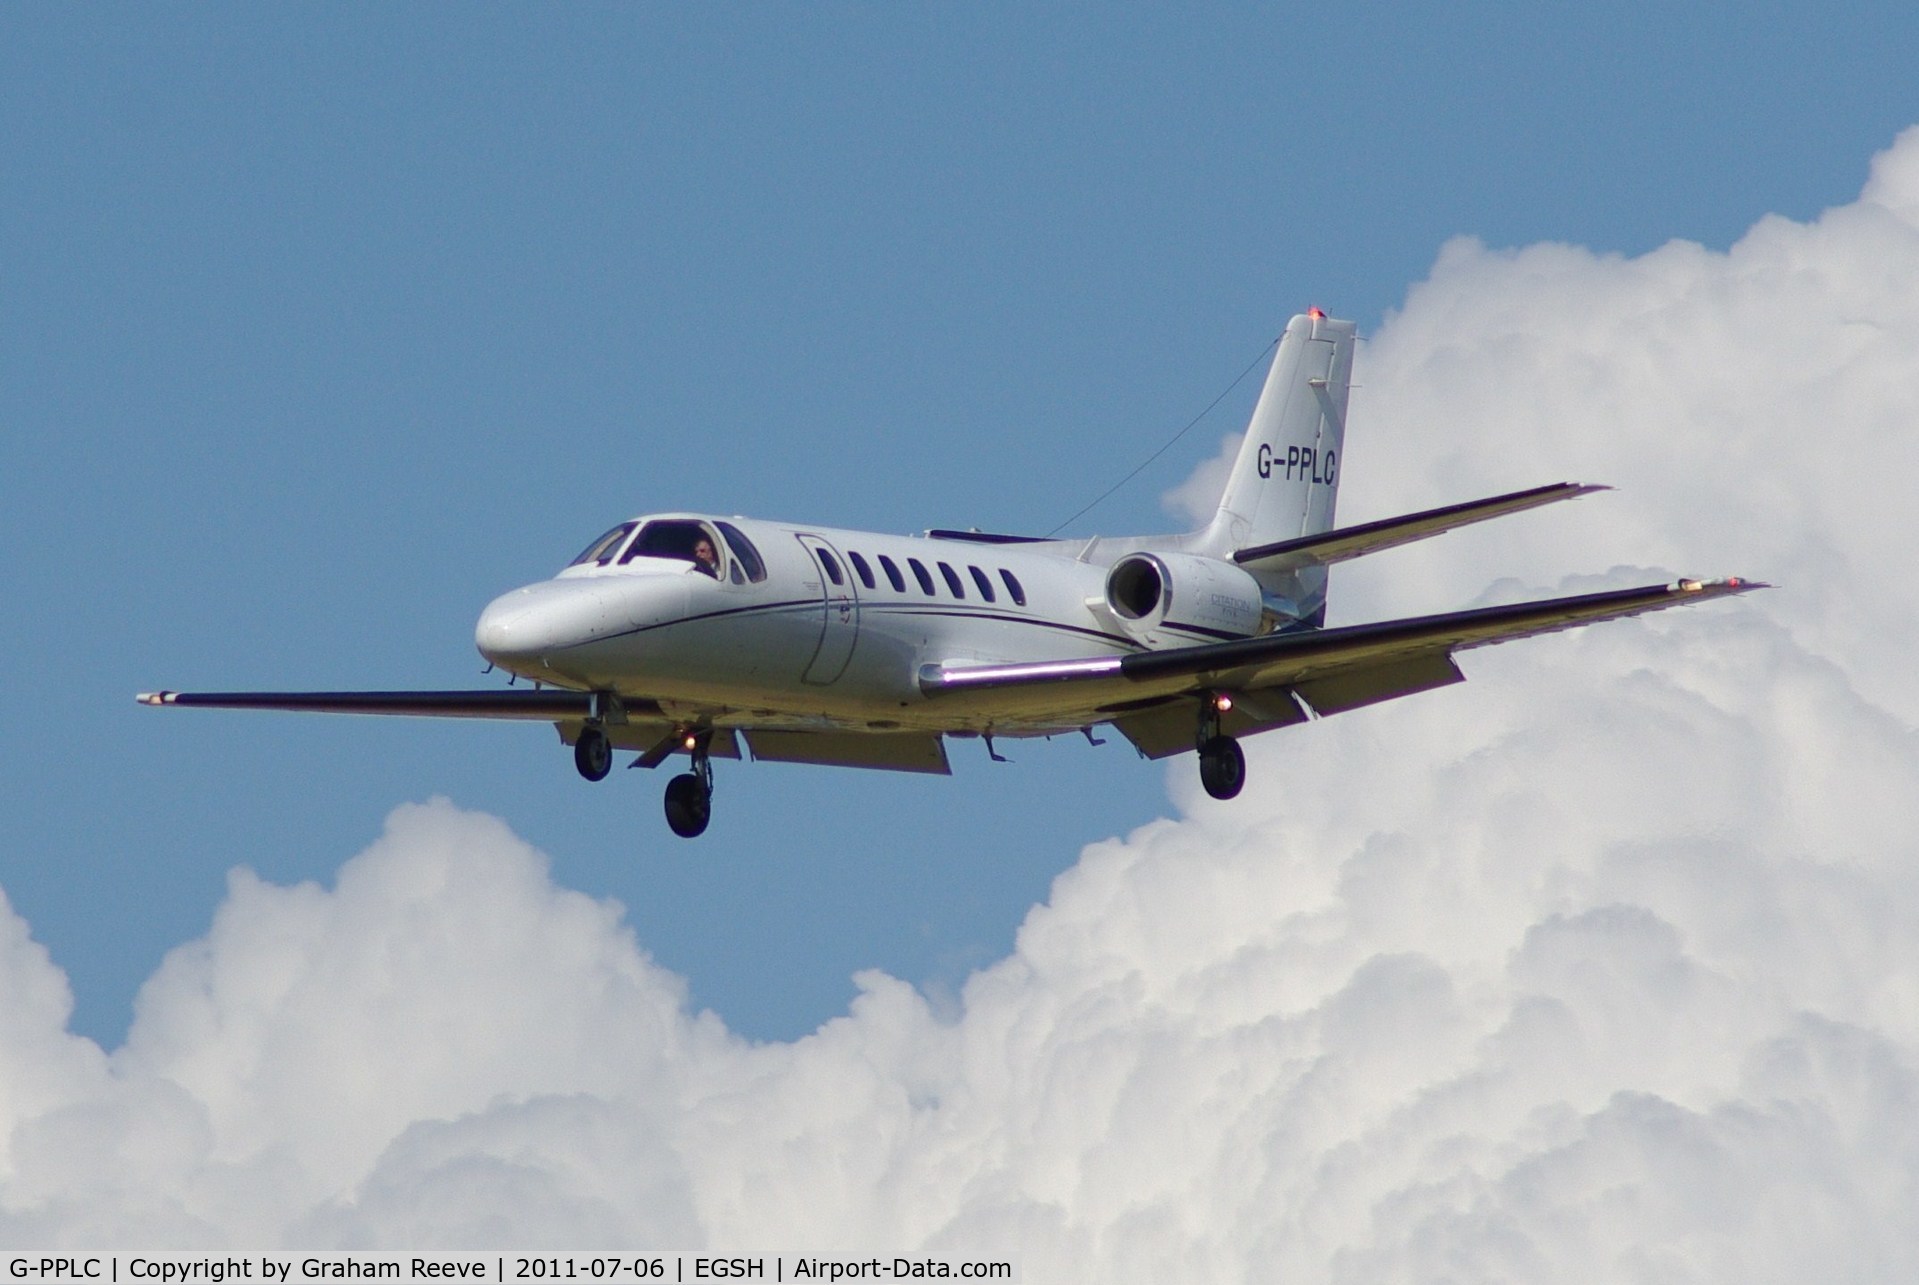 G-PPLC, 1990 Cessna 560 Citation V C/N 560-0059, About to touch down.